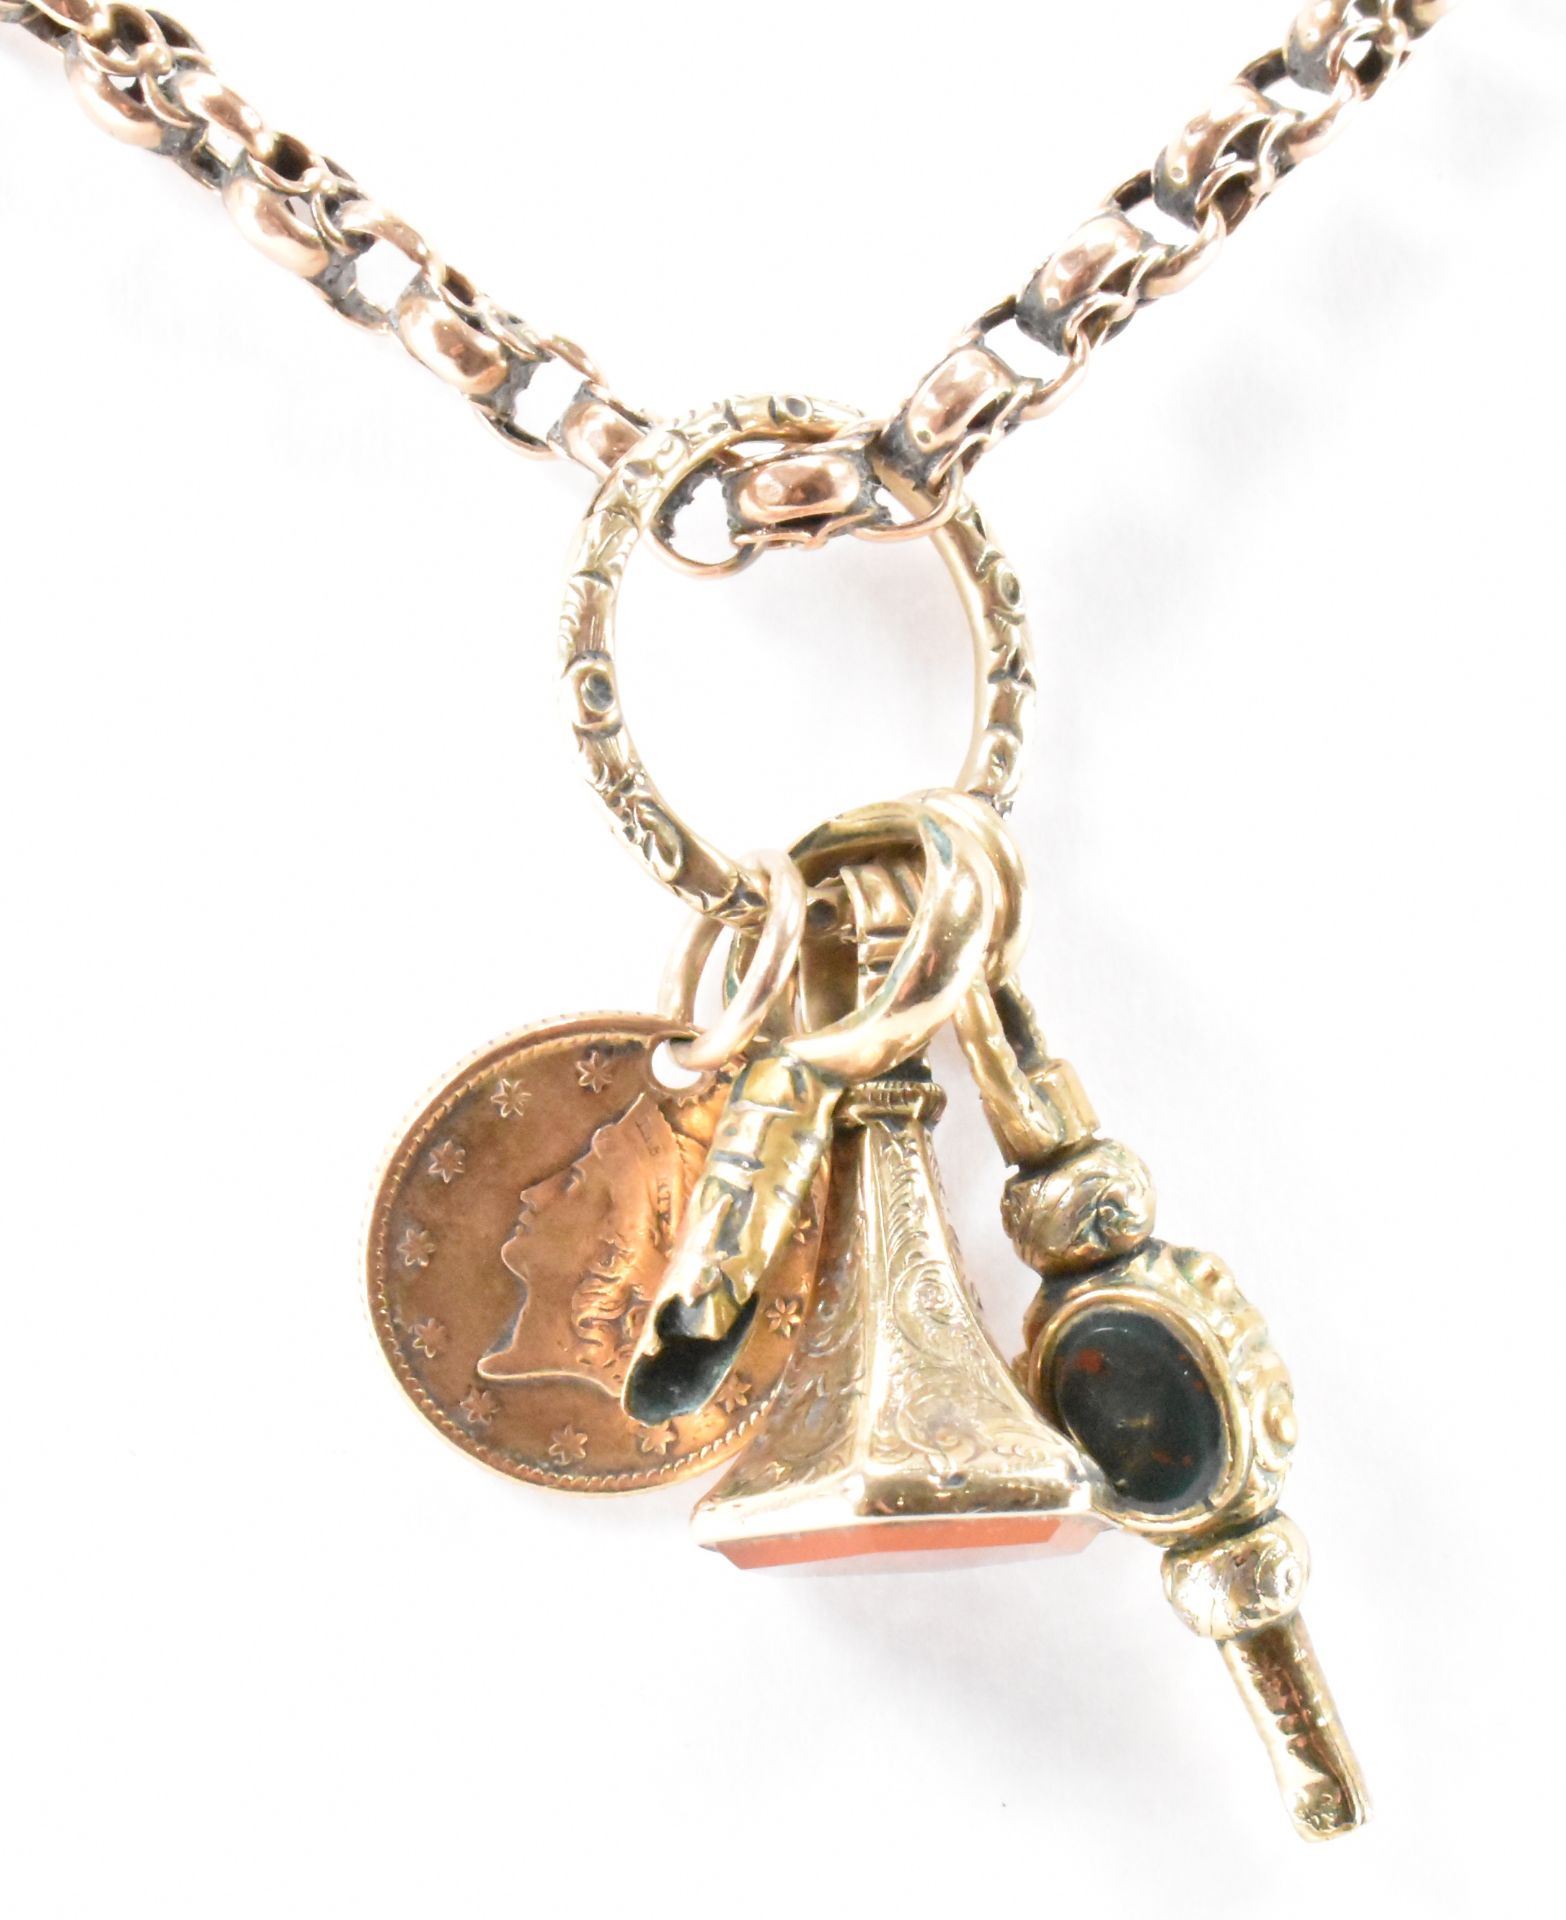 VICTORIAN POCKET WATCH CHAIN NECKLACE - Image 2 of 6